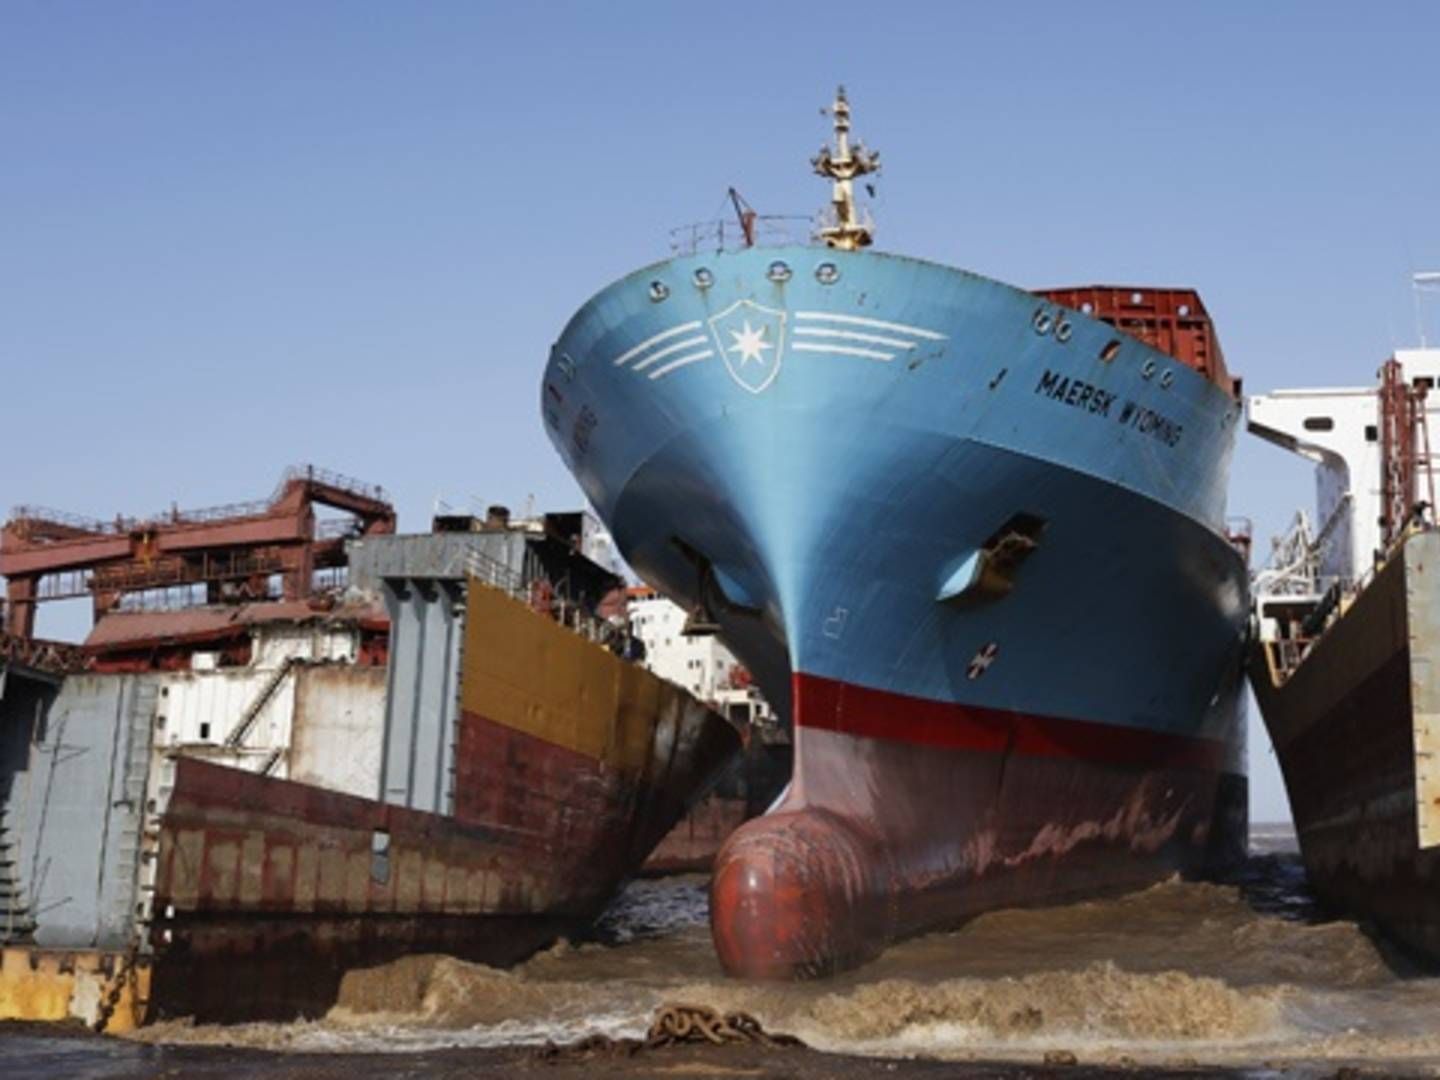 Scrapping in Alang, India. | Photo: PR / Maersk